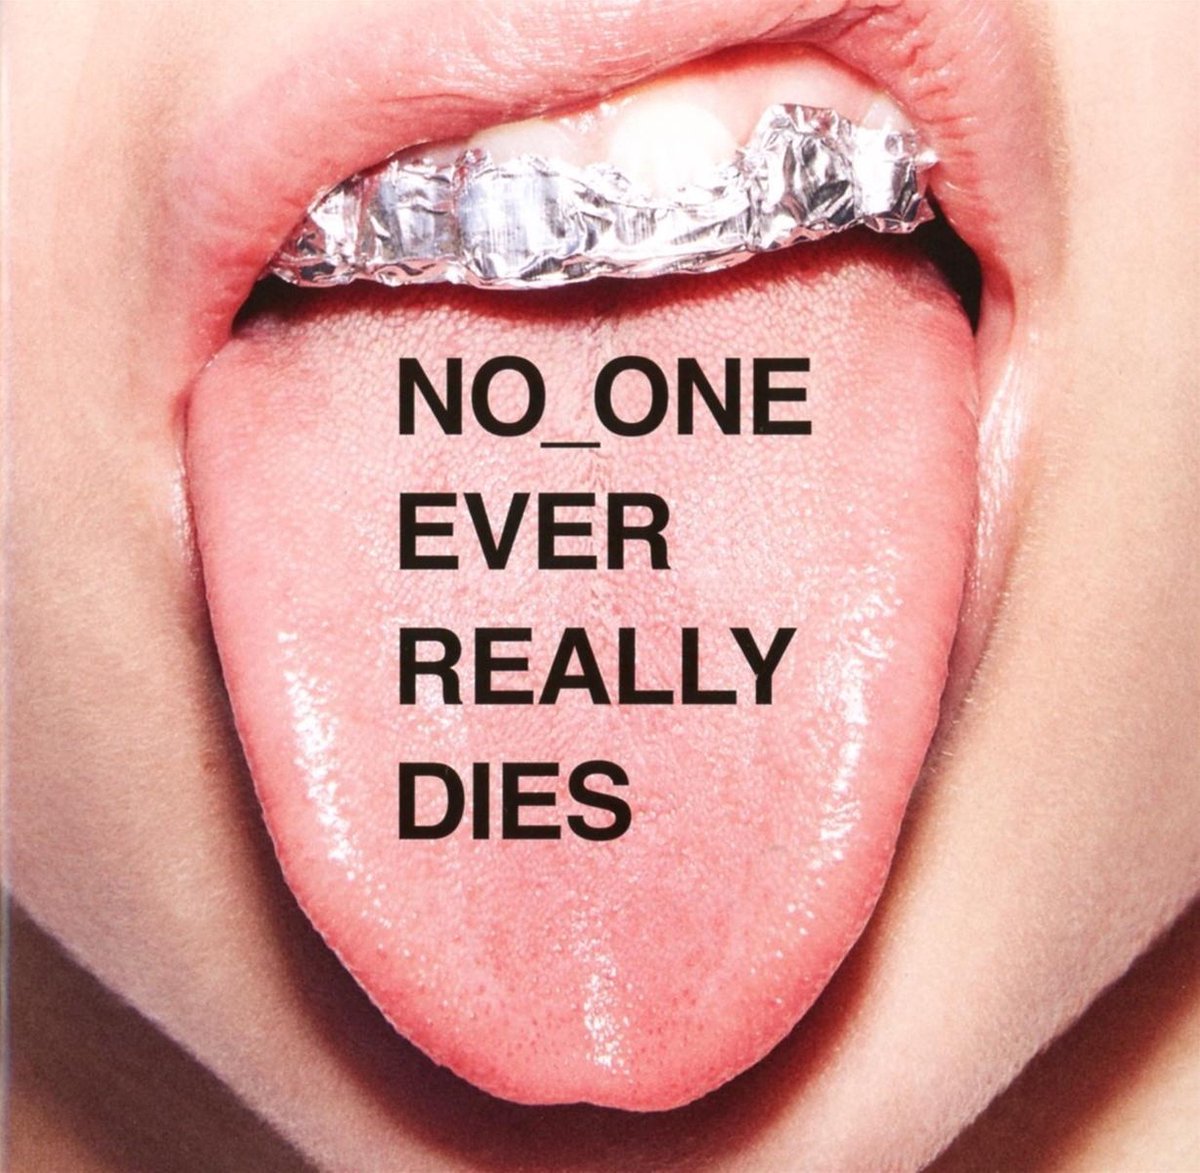 NO_ONE EVER REALLY DIES - N.E.R.D